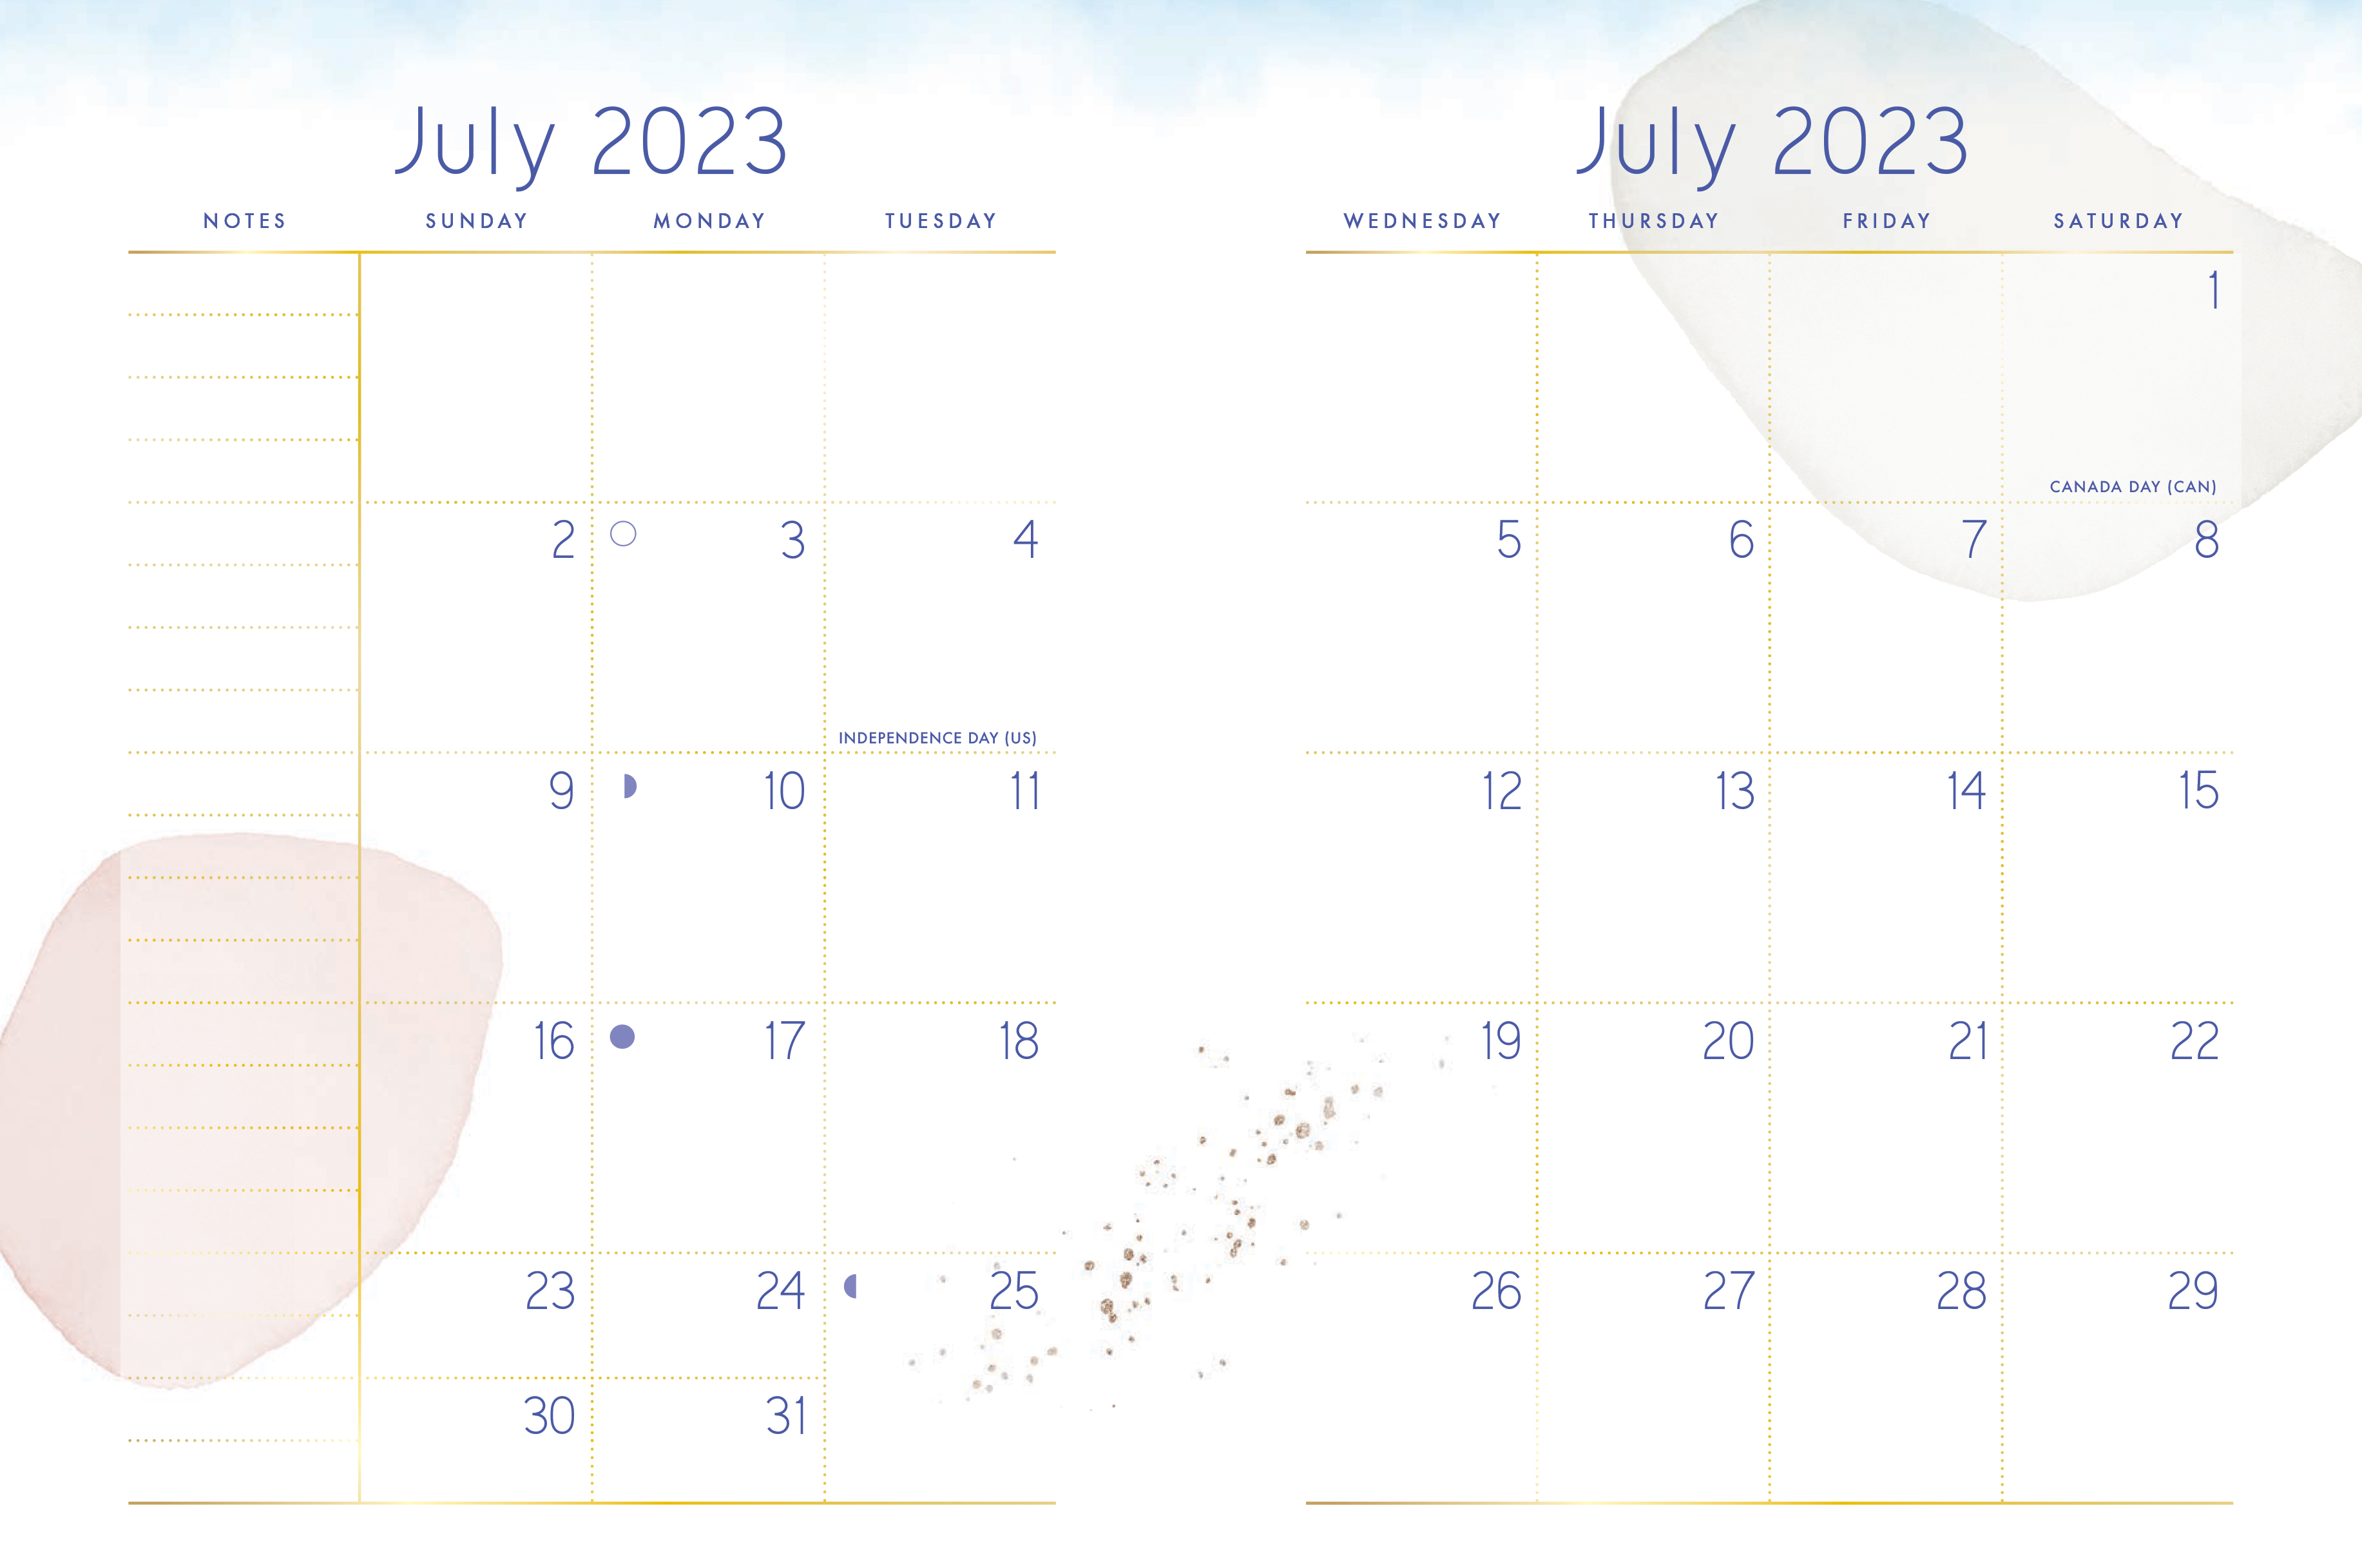 Manifest Your Dreams 2024 Weekly Planner